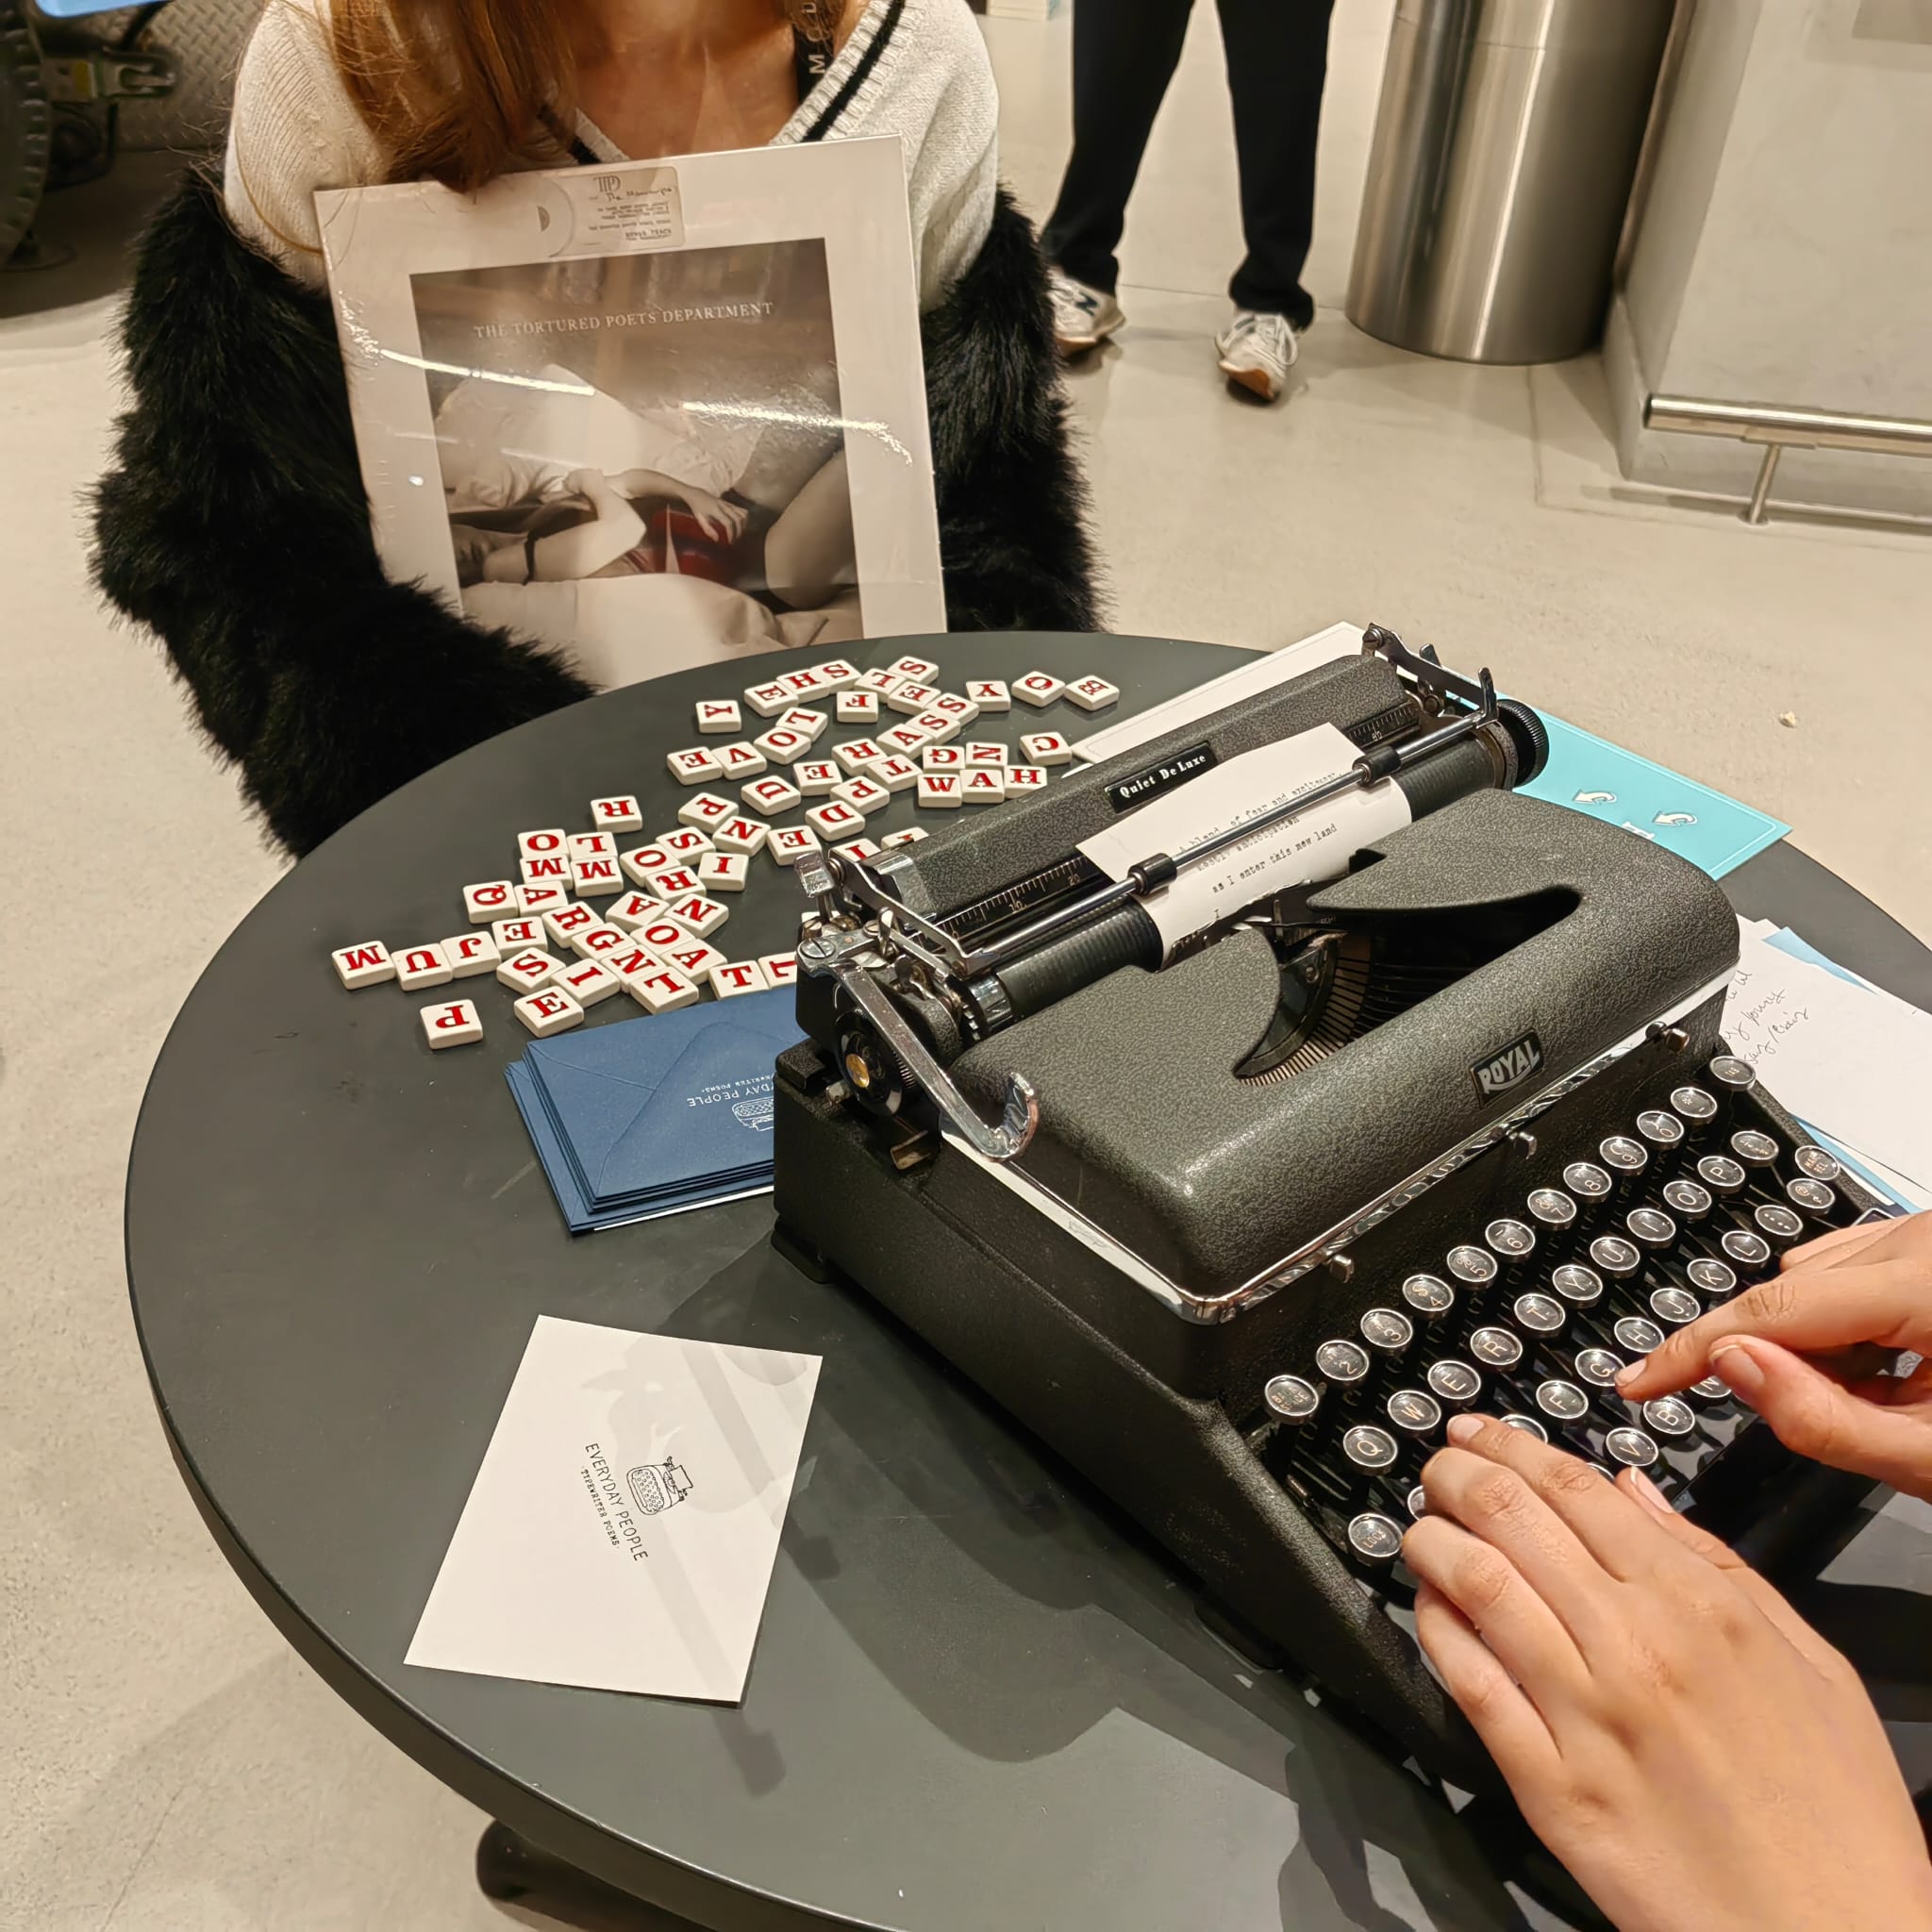 Typewriter Poetry at The Tortured Poets Department by Taylor Swift Release Party at Indigo, Toronto